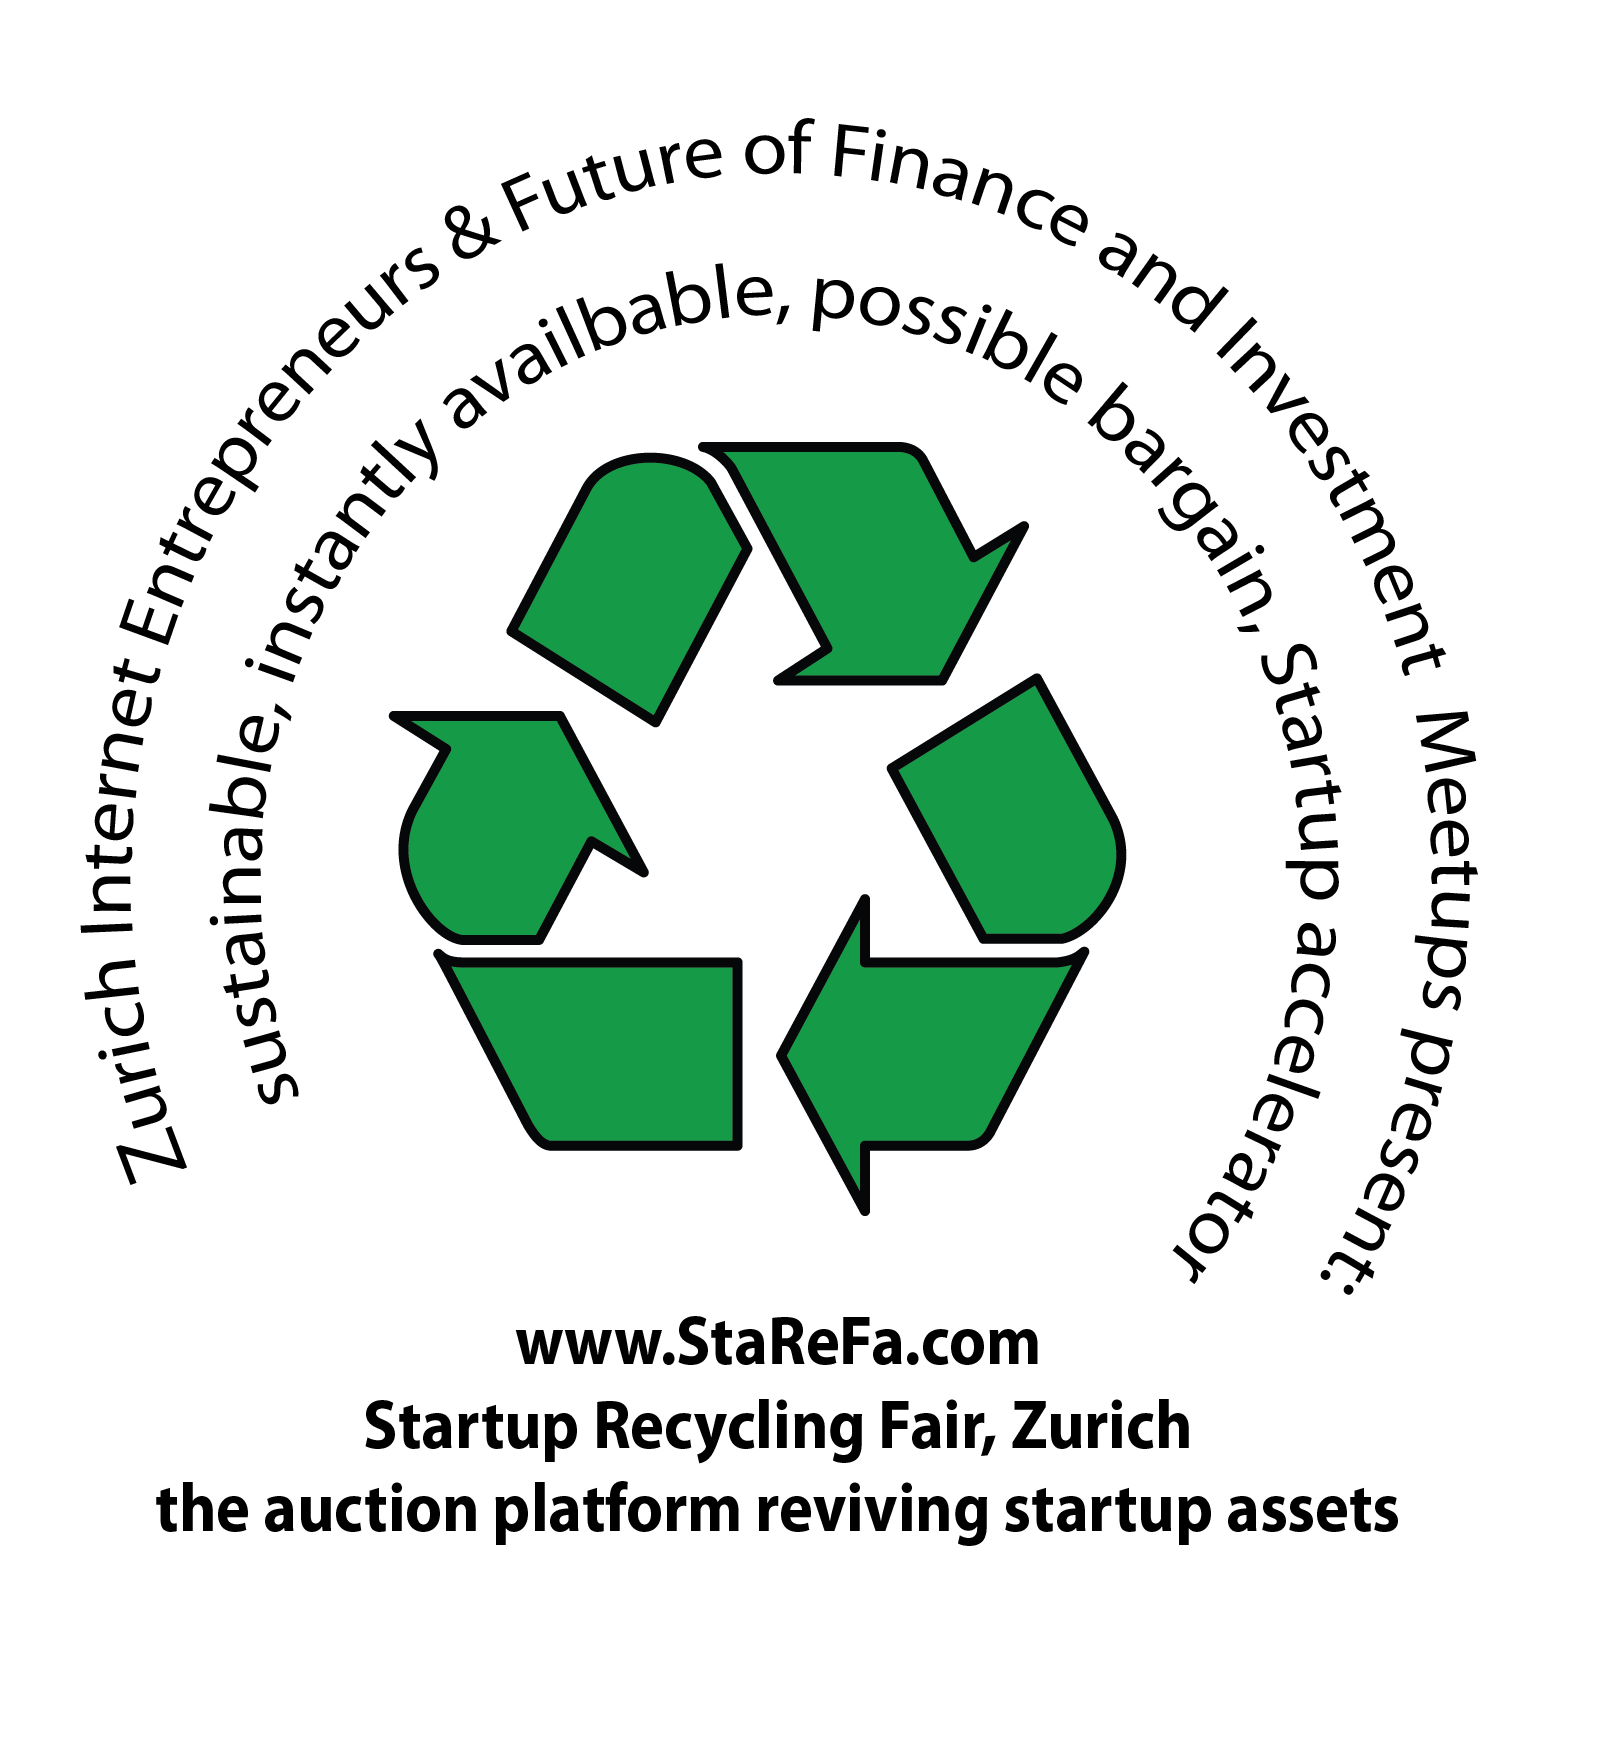 Startup-Recycling Fair